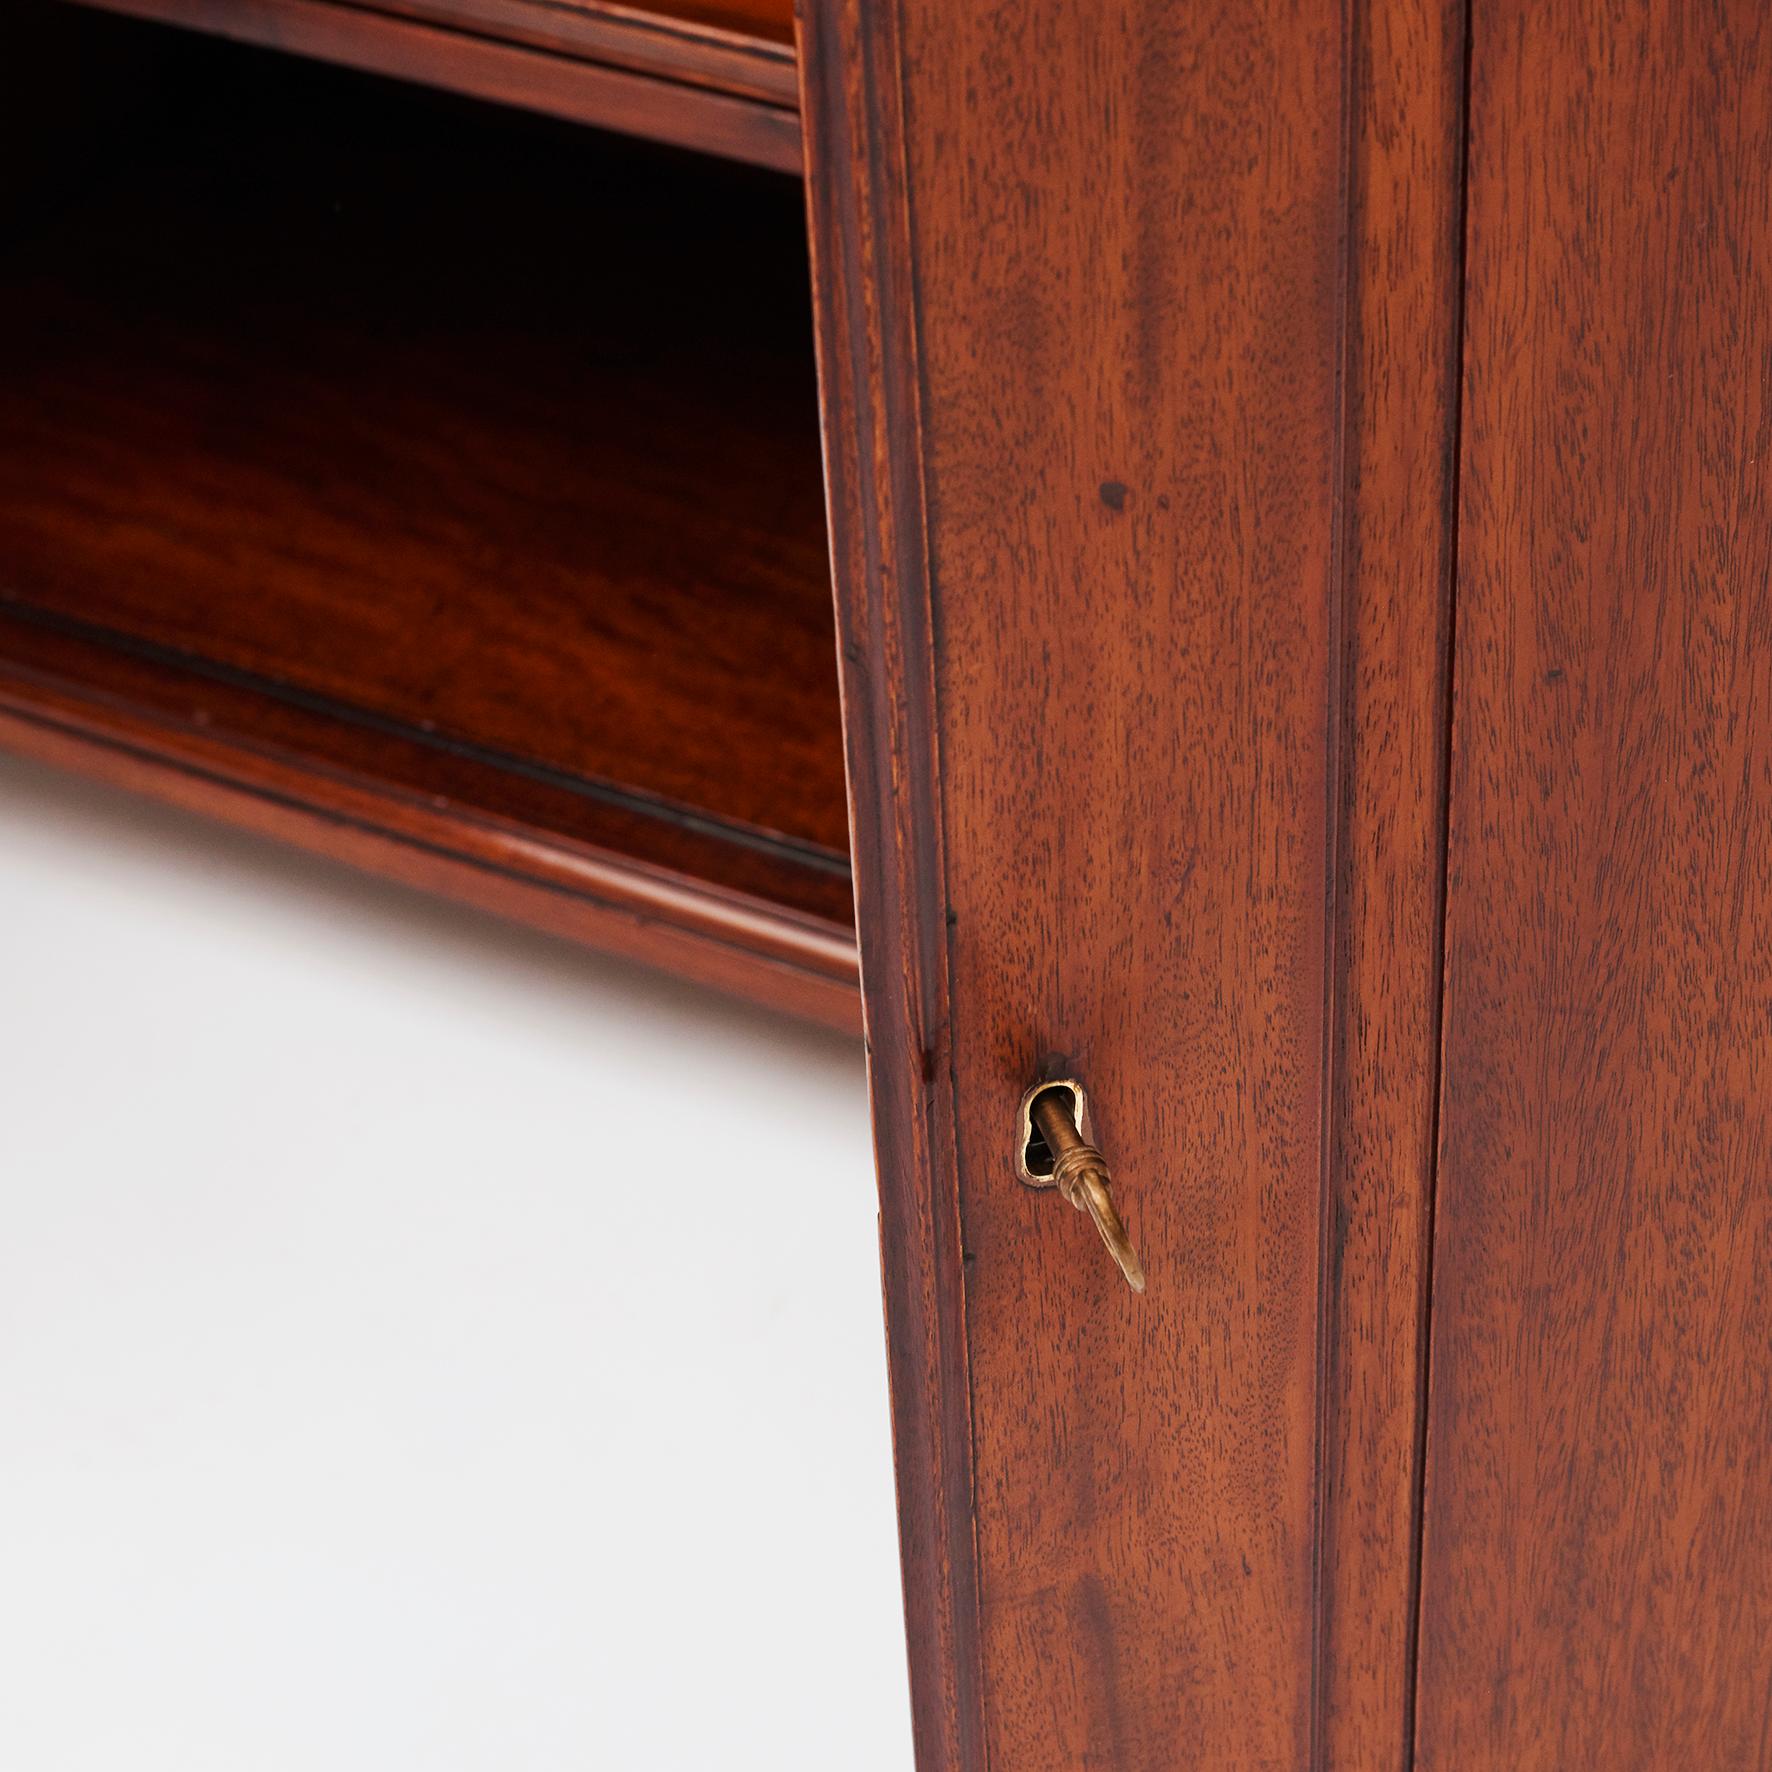 Polished Mahogany Empire Cabinet with Glass Doors from Danish, West Indies